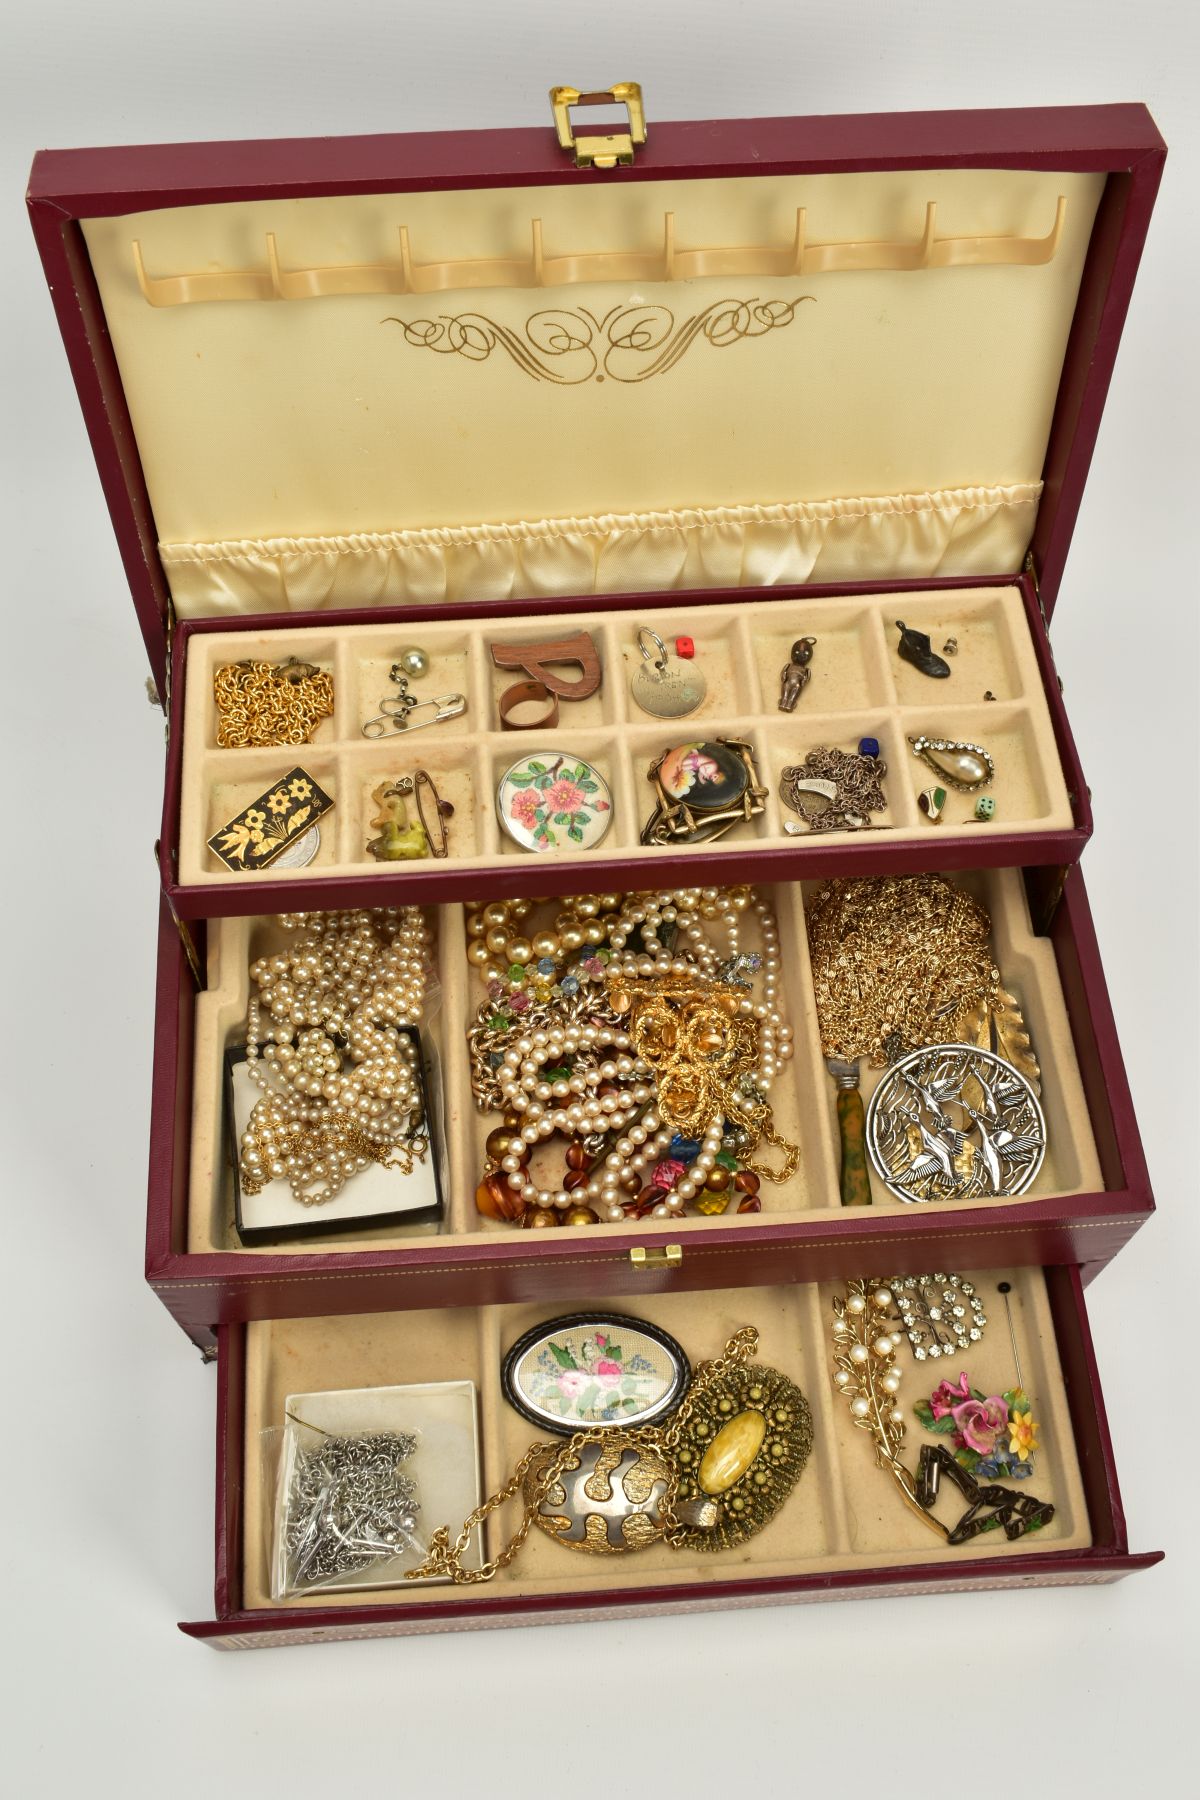 A JEWELLERY BOX WITH COSTUME JEWELLERY, the three tiered burgundy and gold trim jewellery box